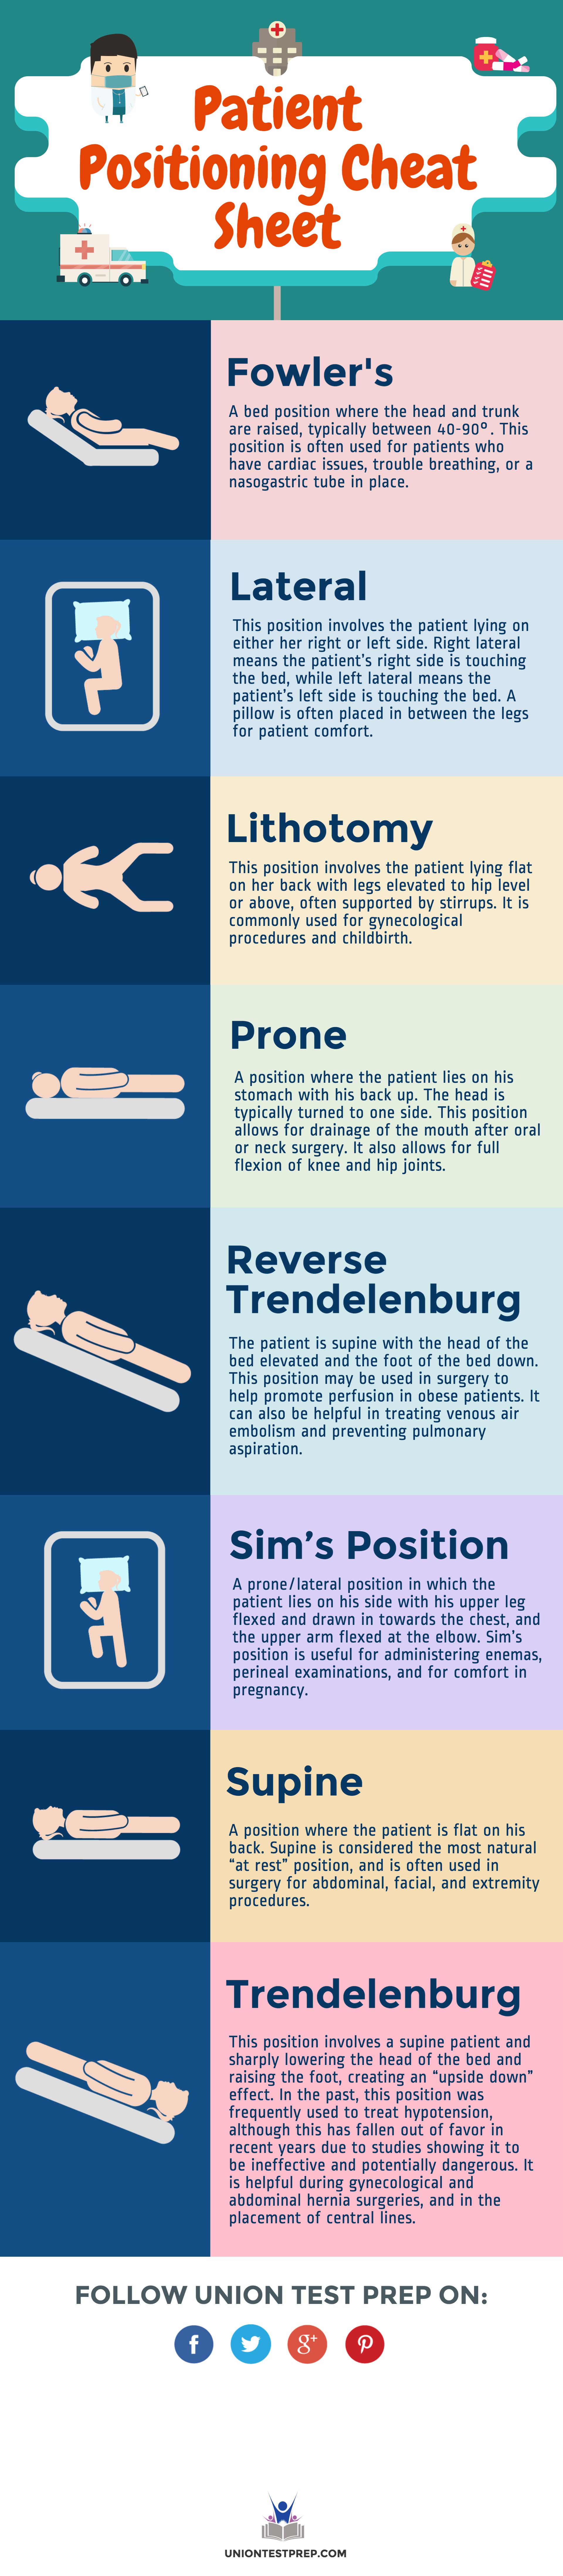 Patient Positioning Cheat Sheet